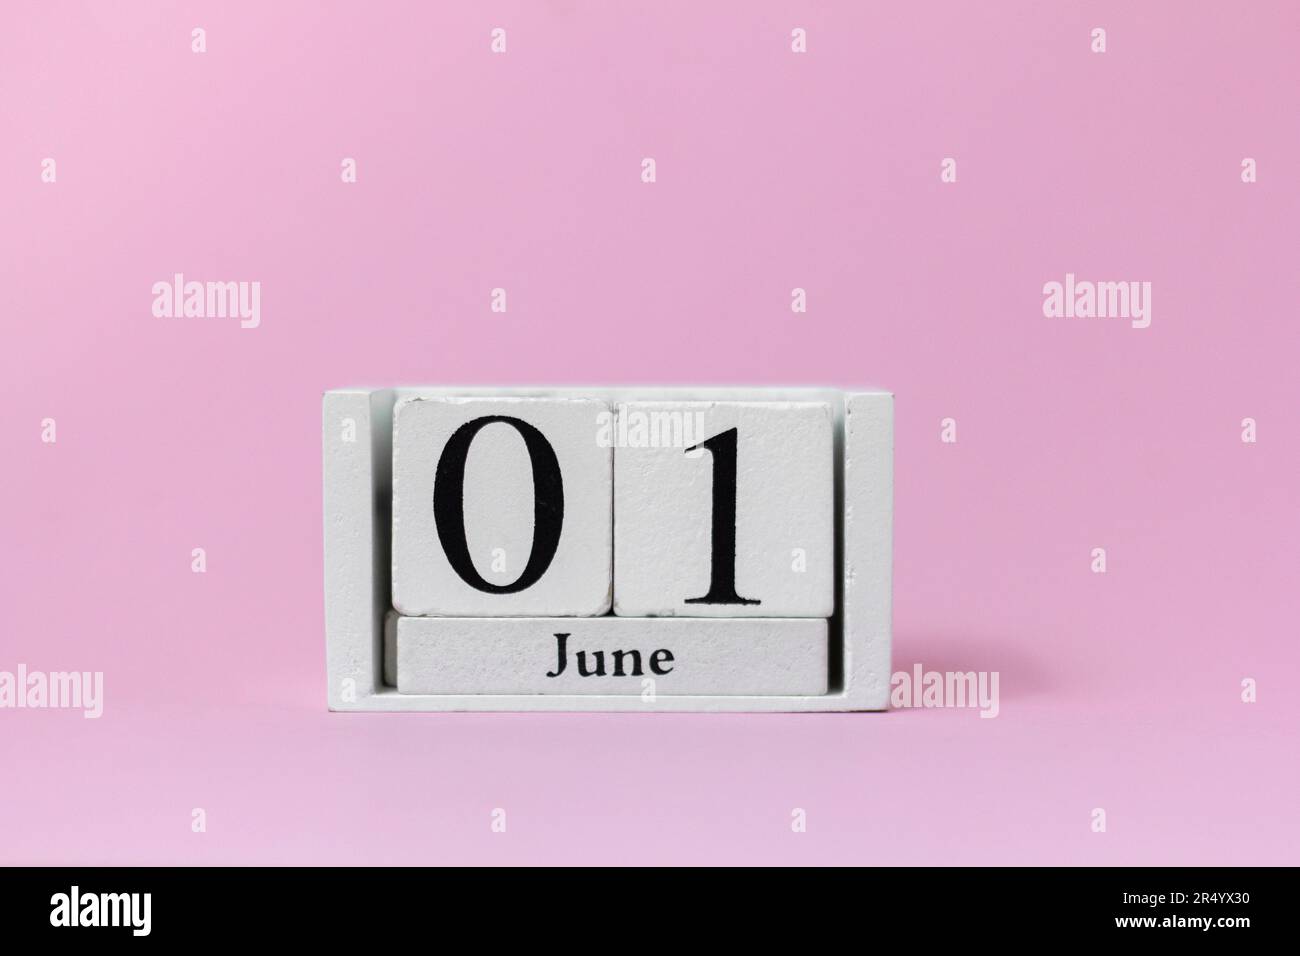 June 1 in the calendar on a pink background is the start date of the new month Stock Photo